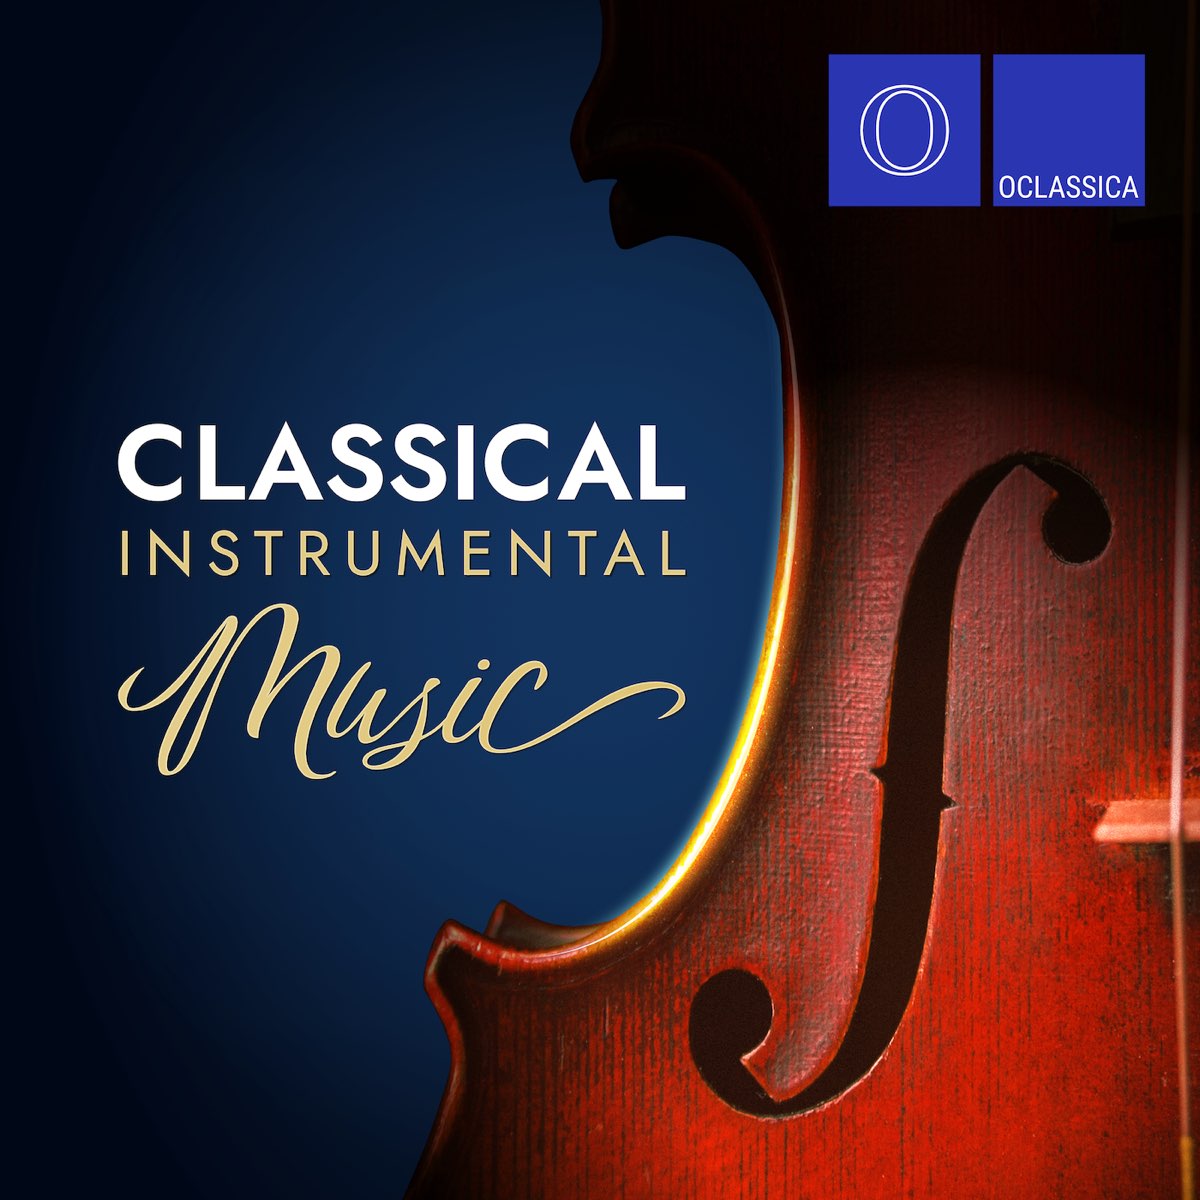 Classical Instrumental Music - Album by Various Artists - Apple Music